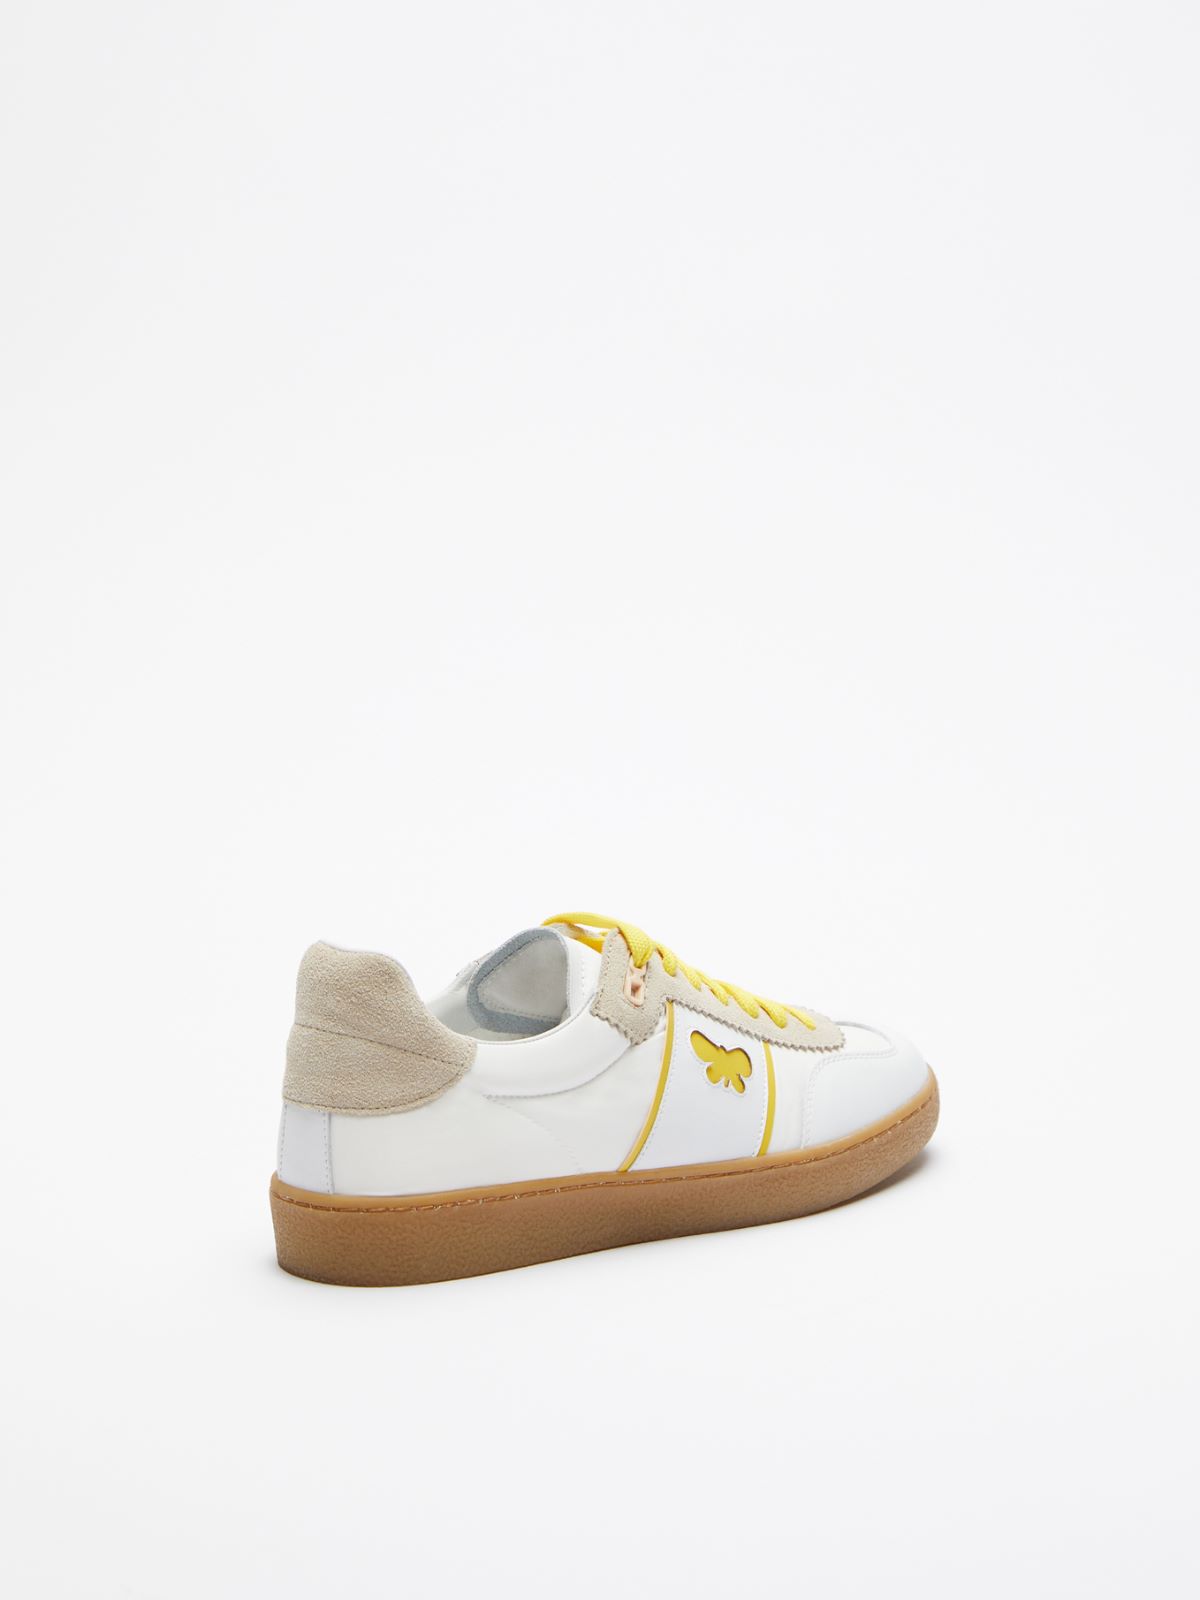 Trainers in technical fabric and leather - BRIGHT YELLOW - Weekend Max Mara - 3